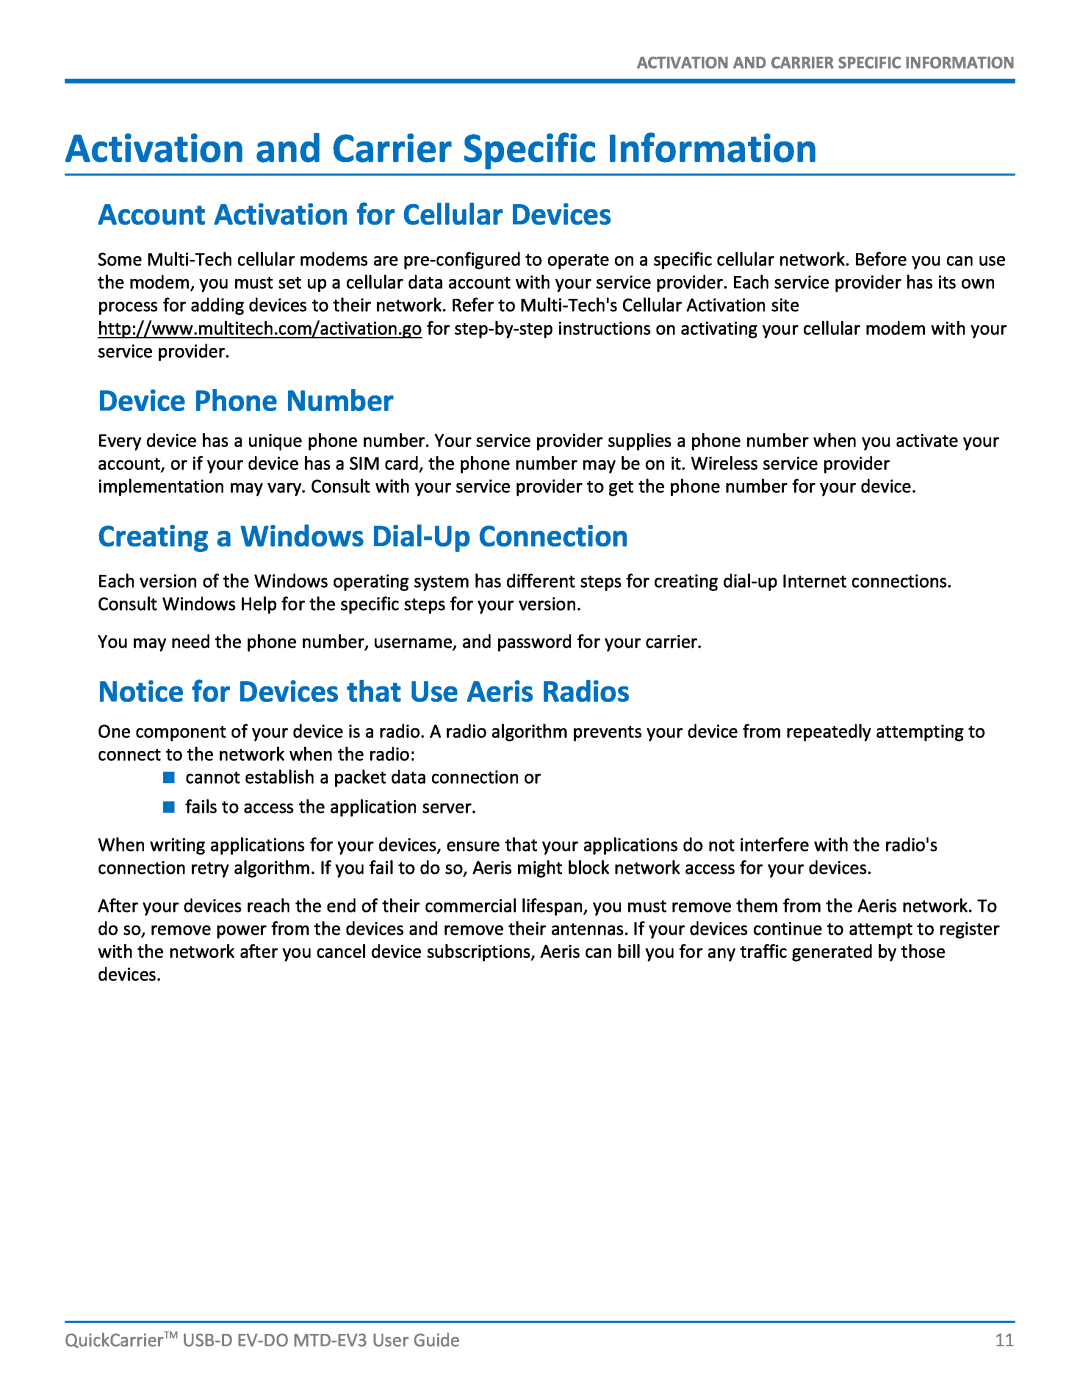 Multi-Tech Systems MTD-EVe manual Activation and Carrier Specific Information, Account Activation for Cellular Devices 